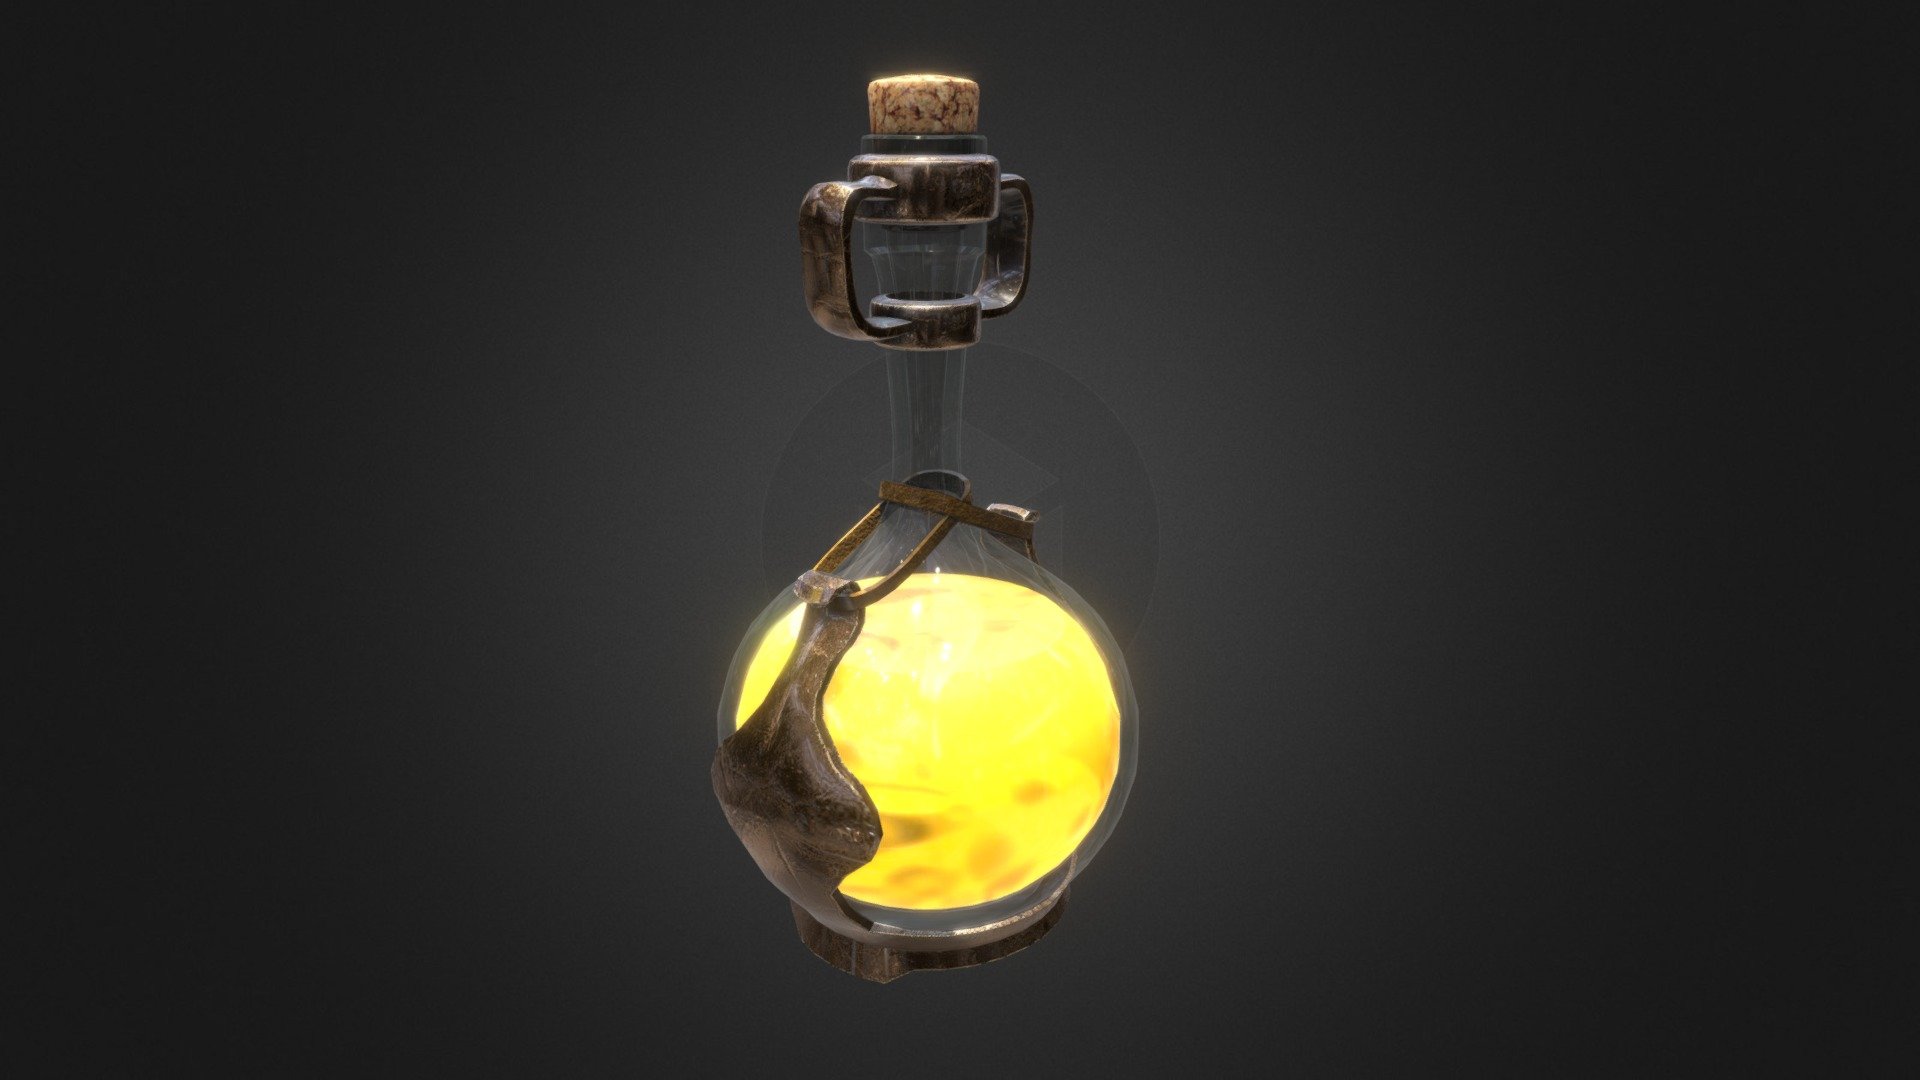 Simple potion stamina elixir for scene or game project.
(game ready asset)

You can purchase the complete pack here.


Tris: 7.652




Texture 2k.

PBR Material.

No internal or hidden geometry.

Hand painted.

Free for use on any personal or commercial project.

If you need a personal customization please let me know in the comments.
Don't forget to check out our other uploads.

You can support our work purchasing one of our items.
Link in the bio 3d model